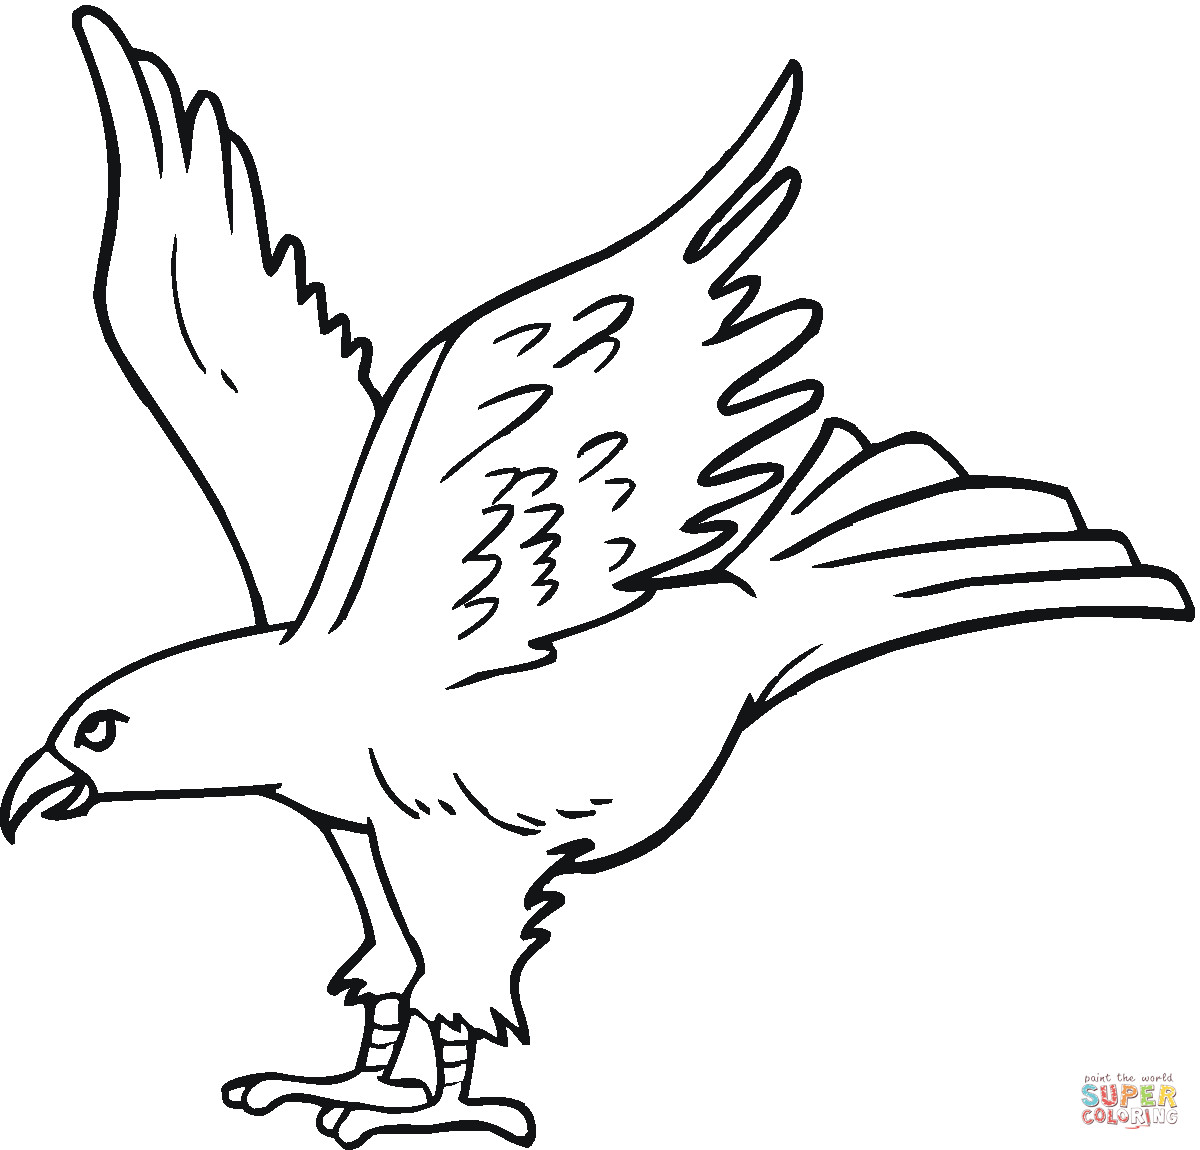 Coloring Sheets For Boys Hawk
 How To Draw A Hawk For Kids Coloring Home